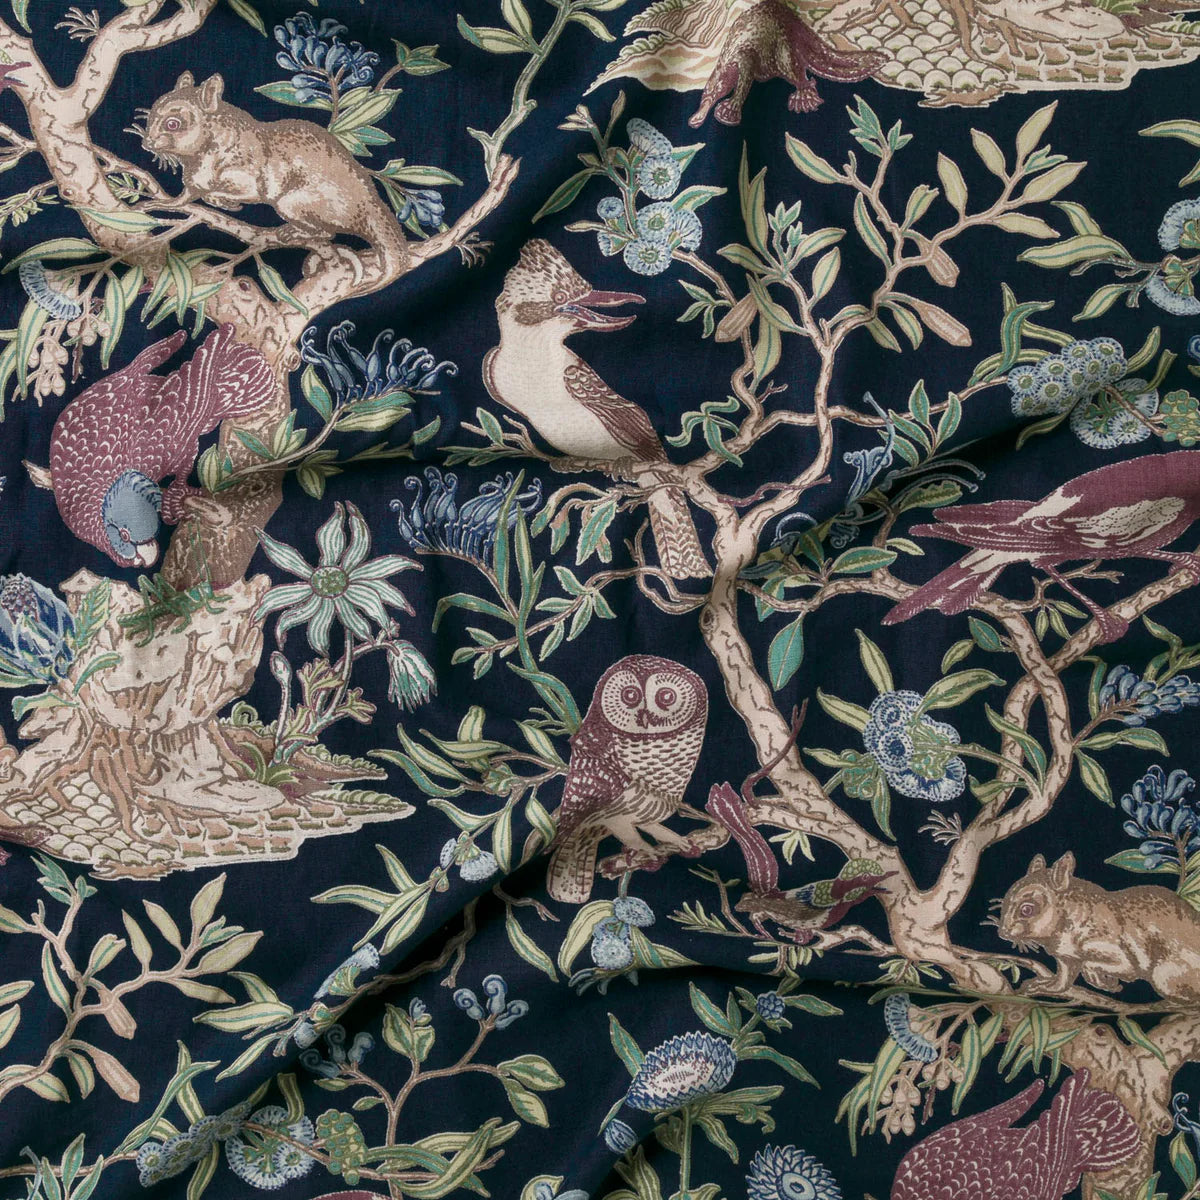 Draped fabric in an animal and tree branch print in brown, purple and green on a black field.